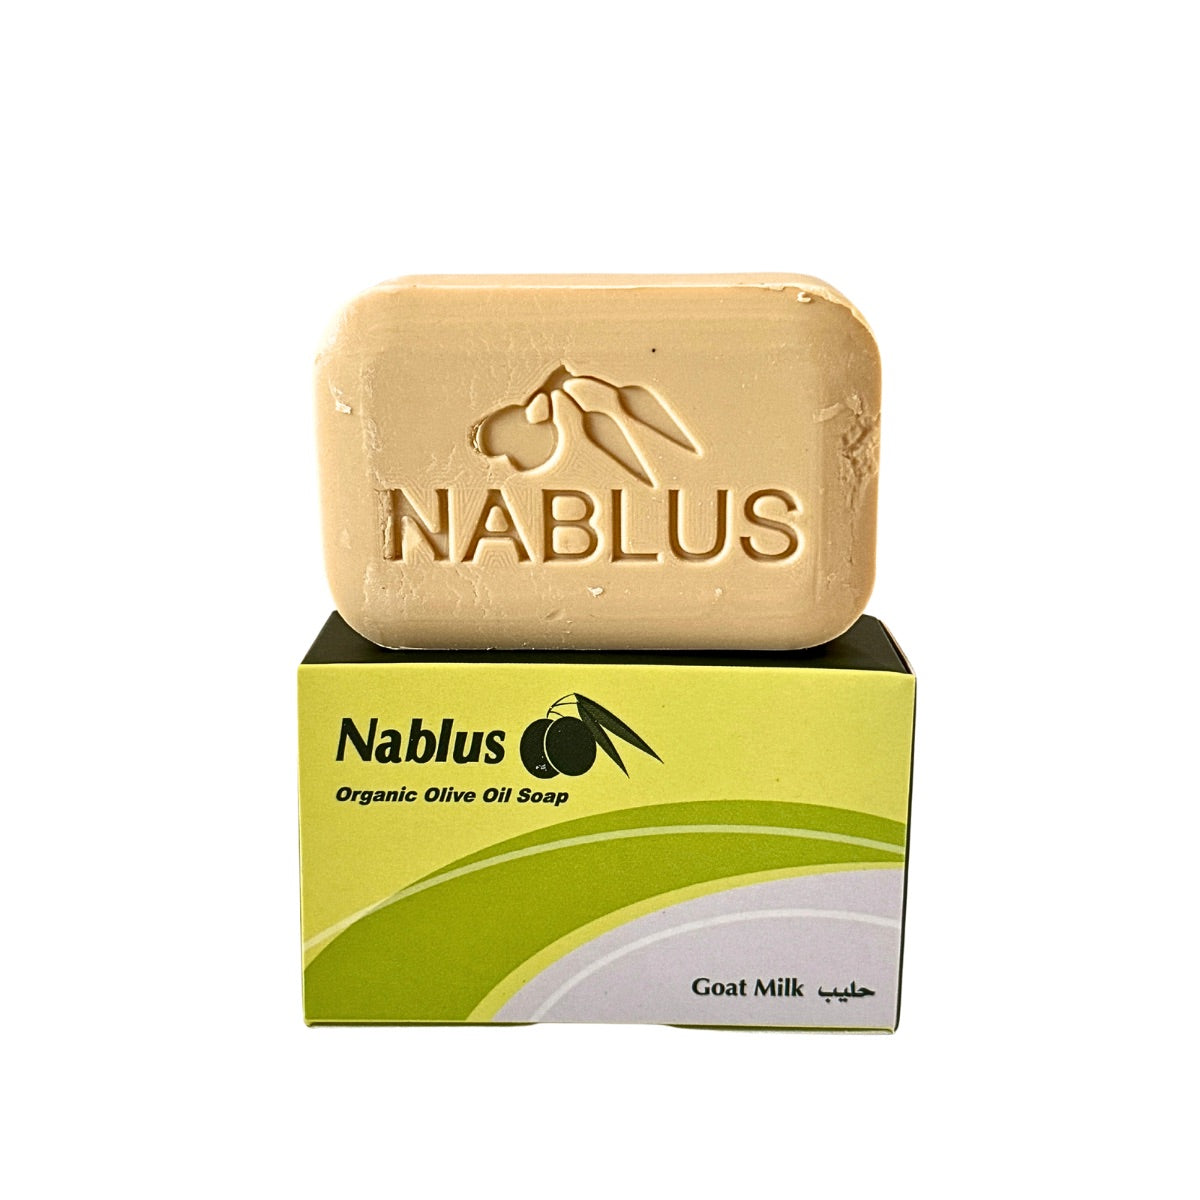 Scented Soap from Nablus